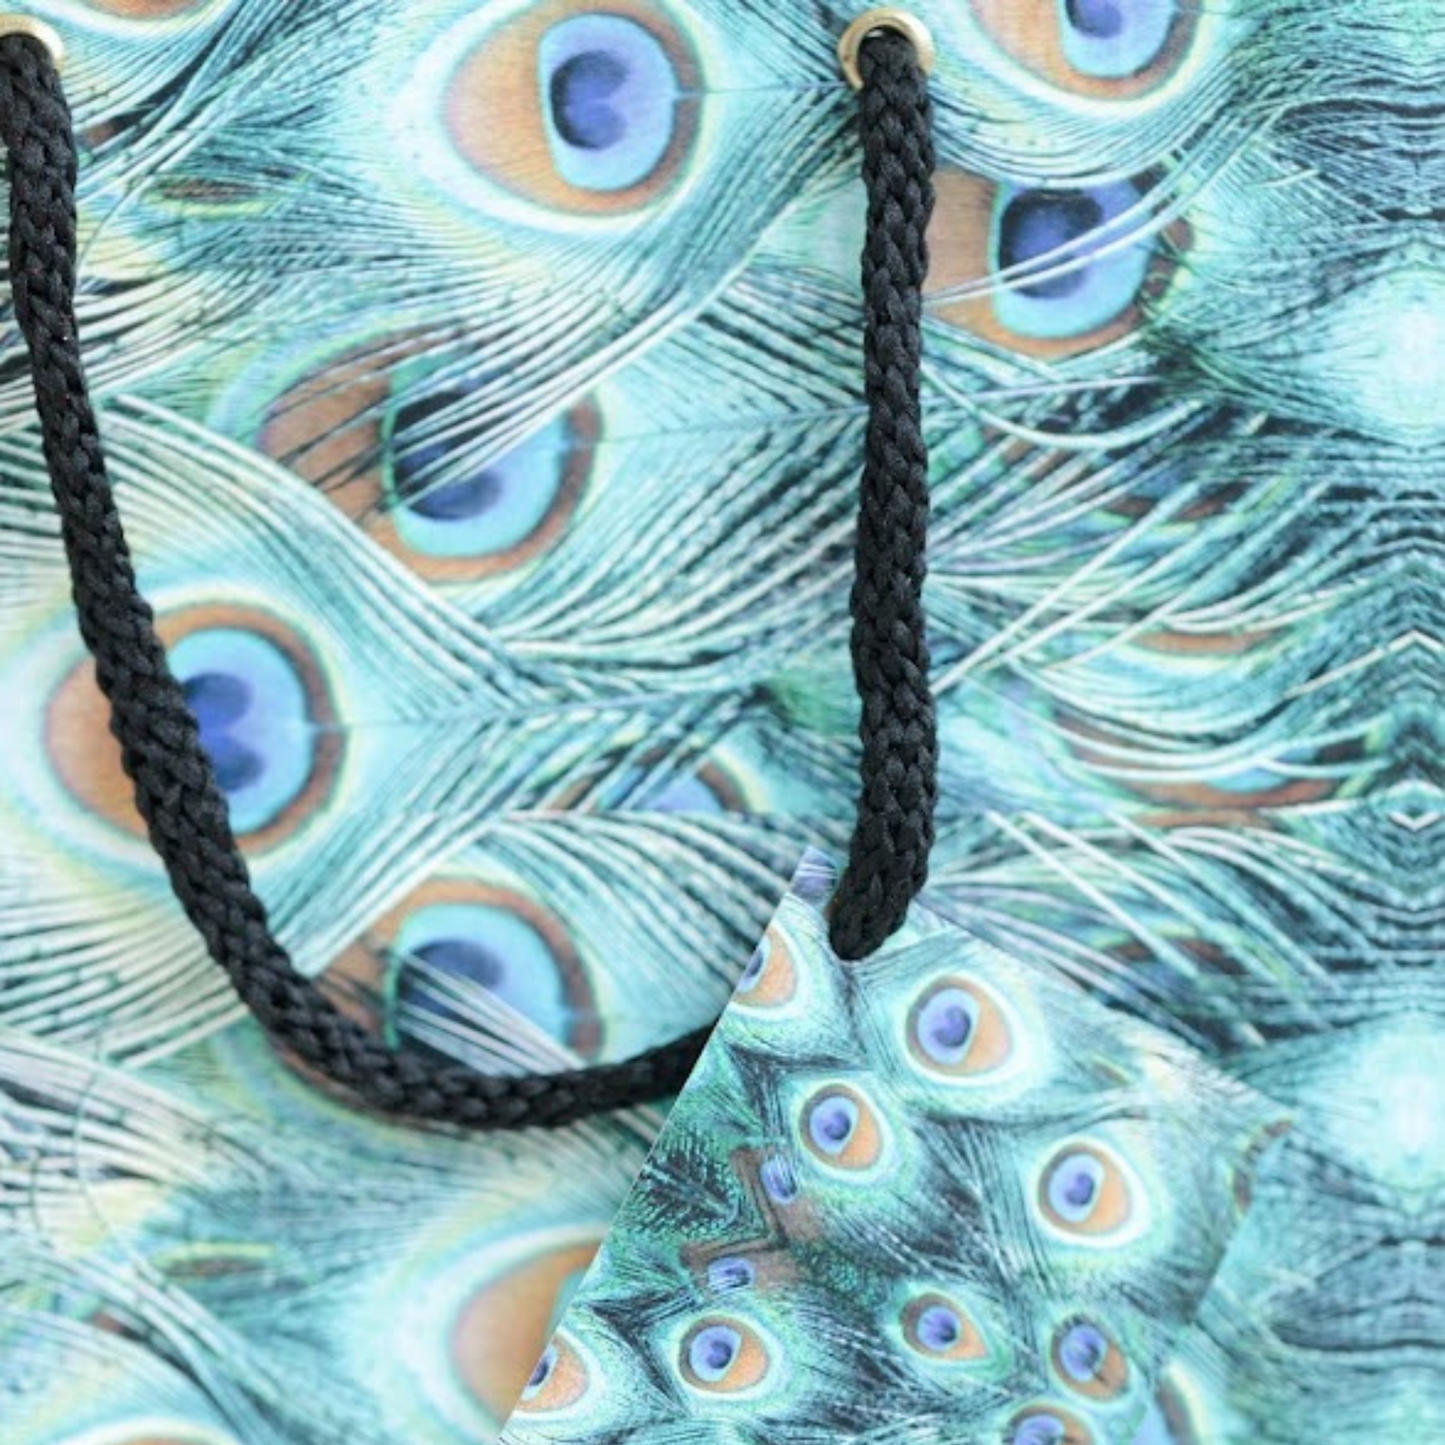 Peacock Feathers Blue Small Gift Bag